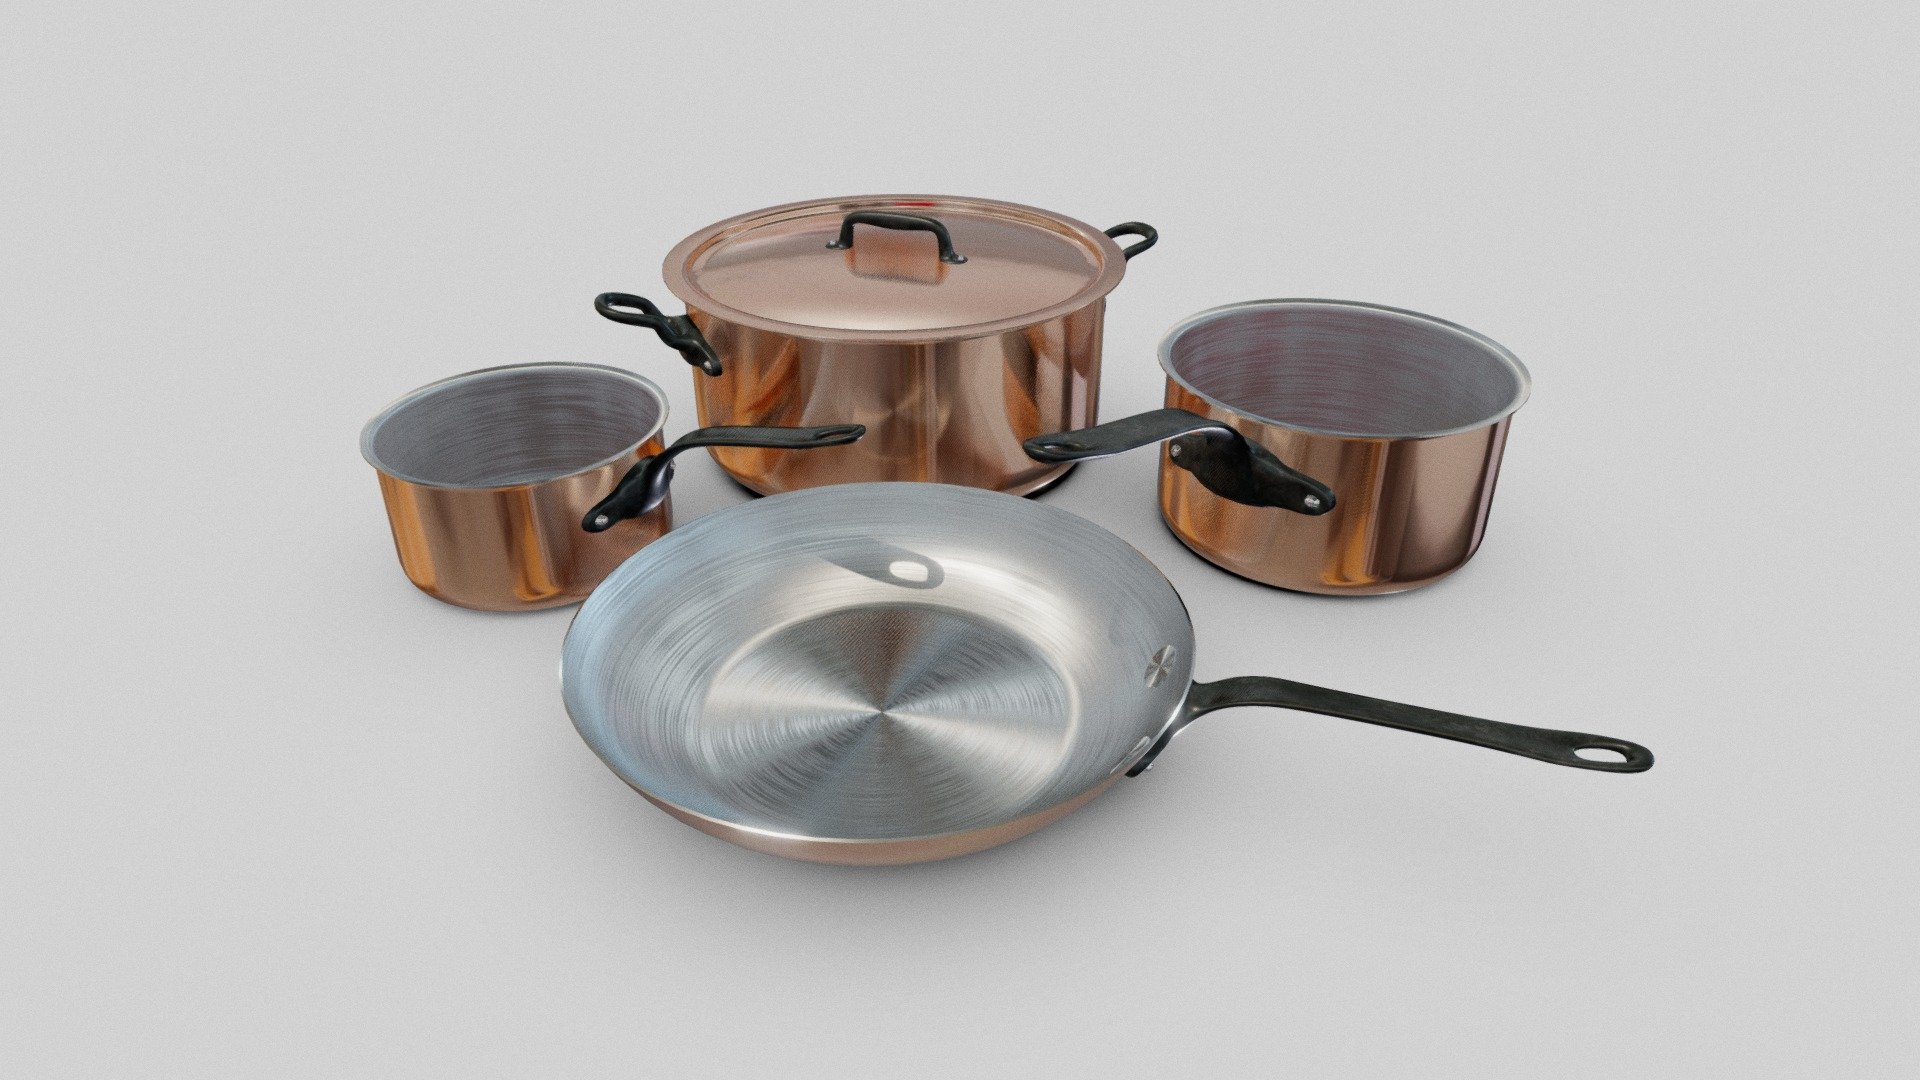 Some fancy copper pots and pans.

Tools Used

Modelled in Blender
Textures in GIMP
Handle texture sourced from Textures.com

Offline Render
 - 3DDecember 2021 - Copper Pots and Pans - Download Free 3D model by Jack Kelly (@slightlyintelligent) 3d model